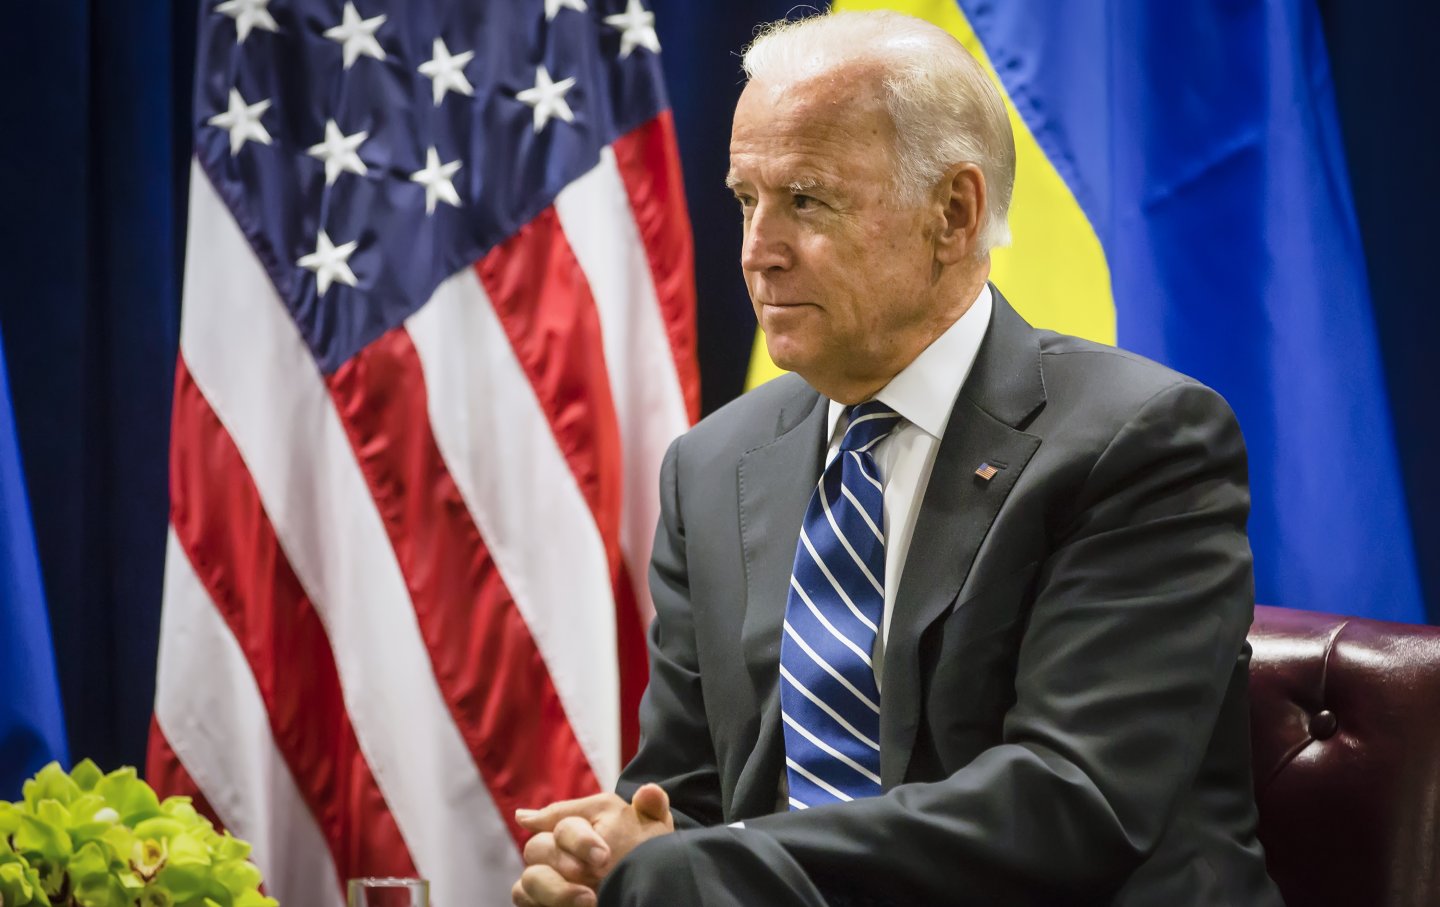 Biden sits in front of a US flag